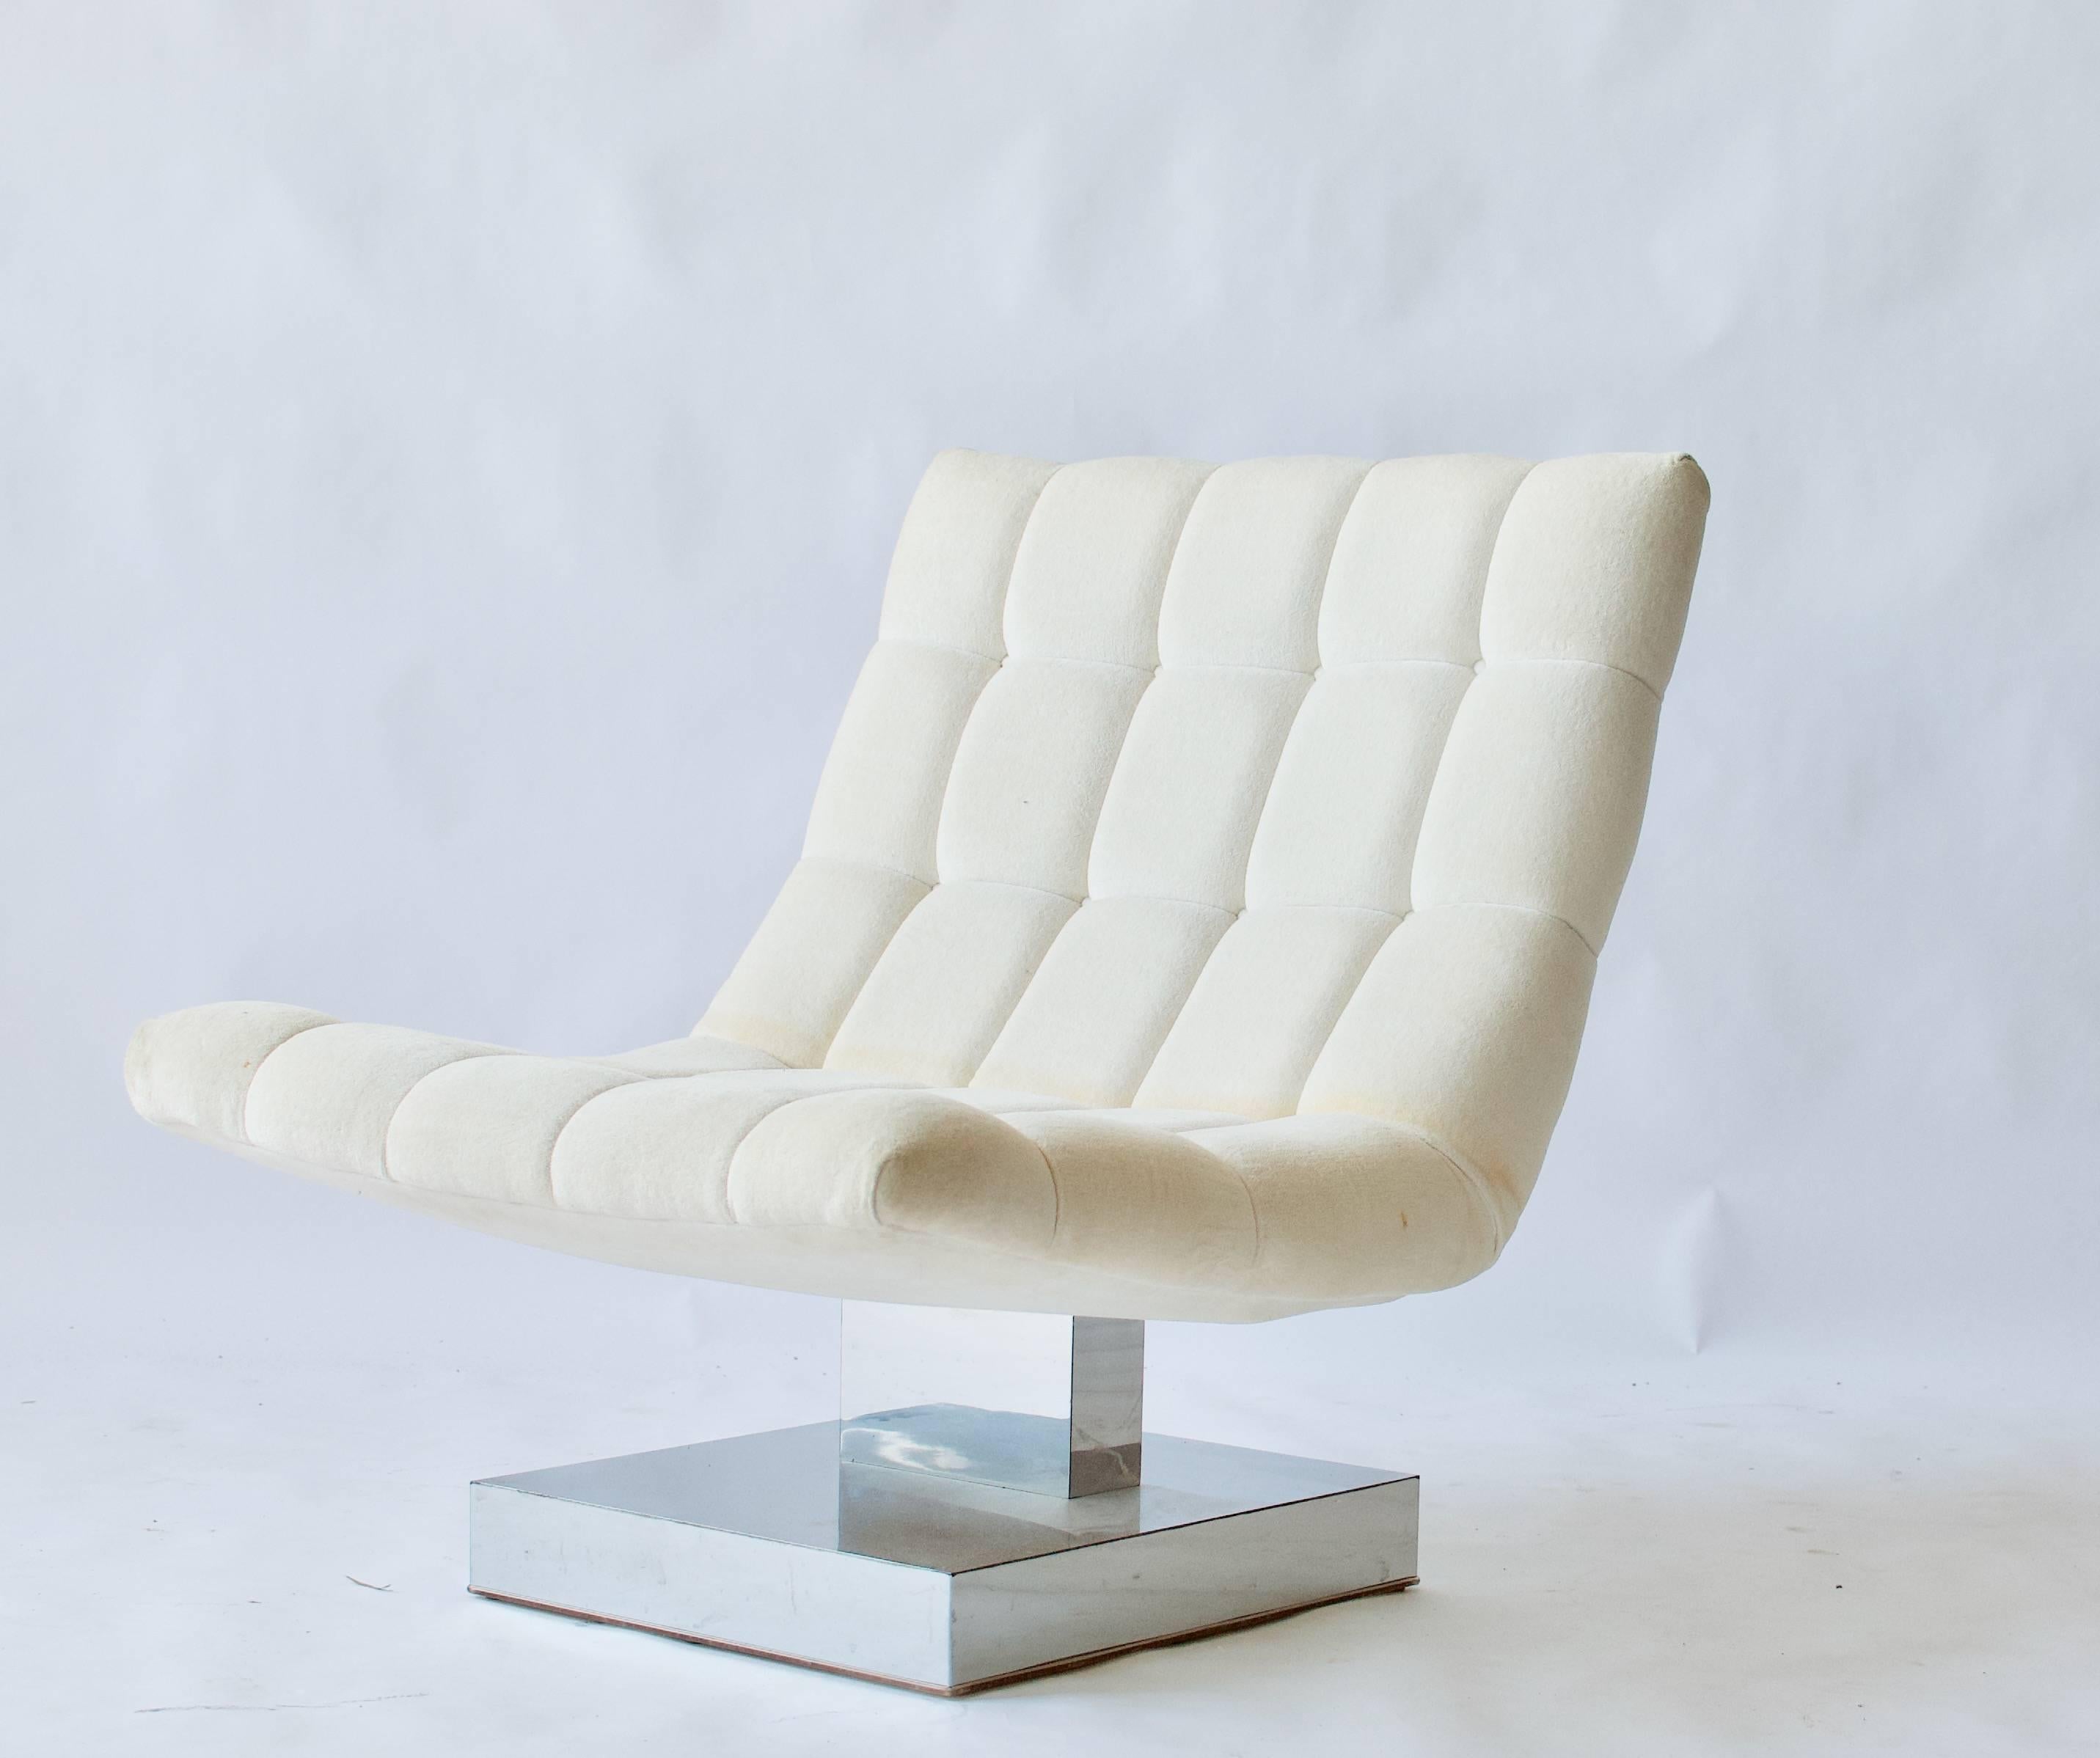 Milo Baughman cantilevered lounge chair on polished chrome pedestal base. Manufactured by Thayer Coggin.